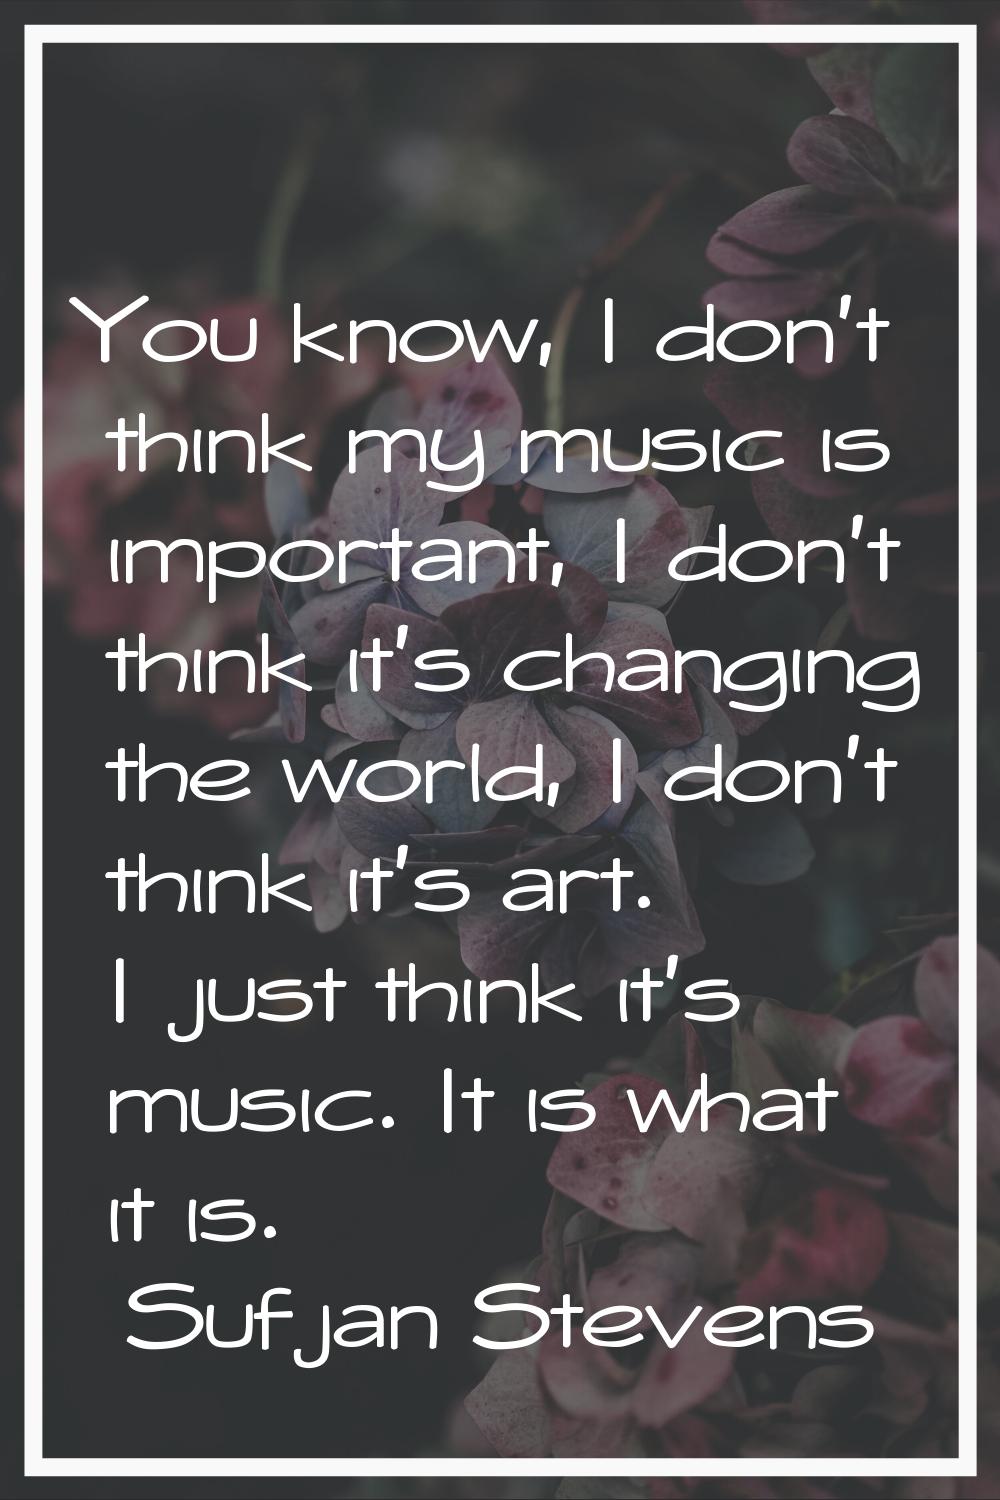 You know, I don't think my music is important, I don't think it's changing the world, I don't think